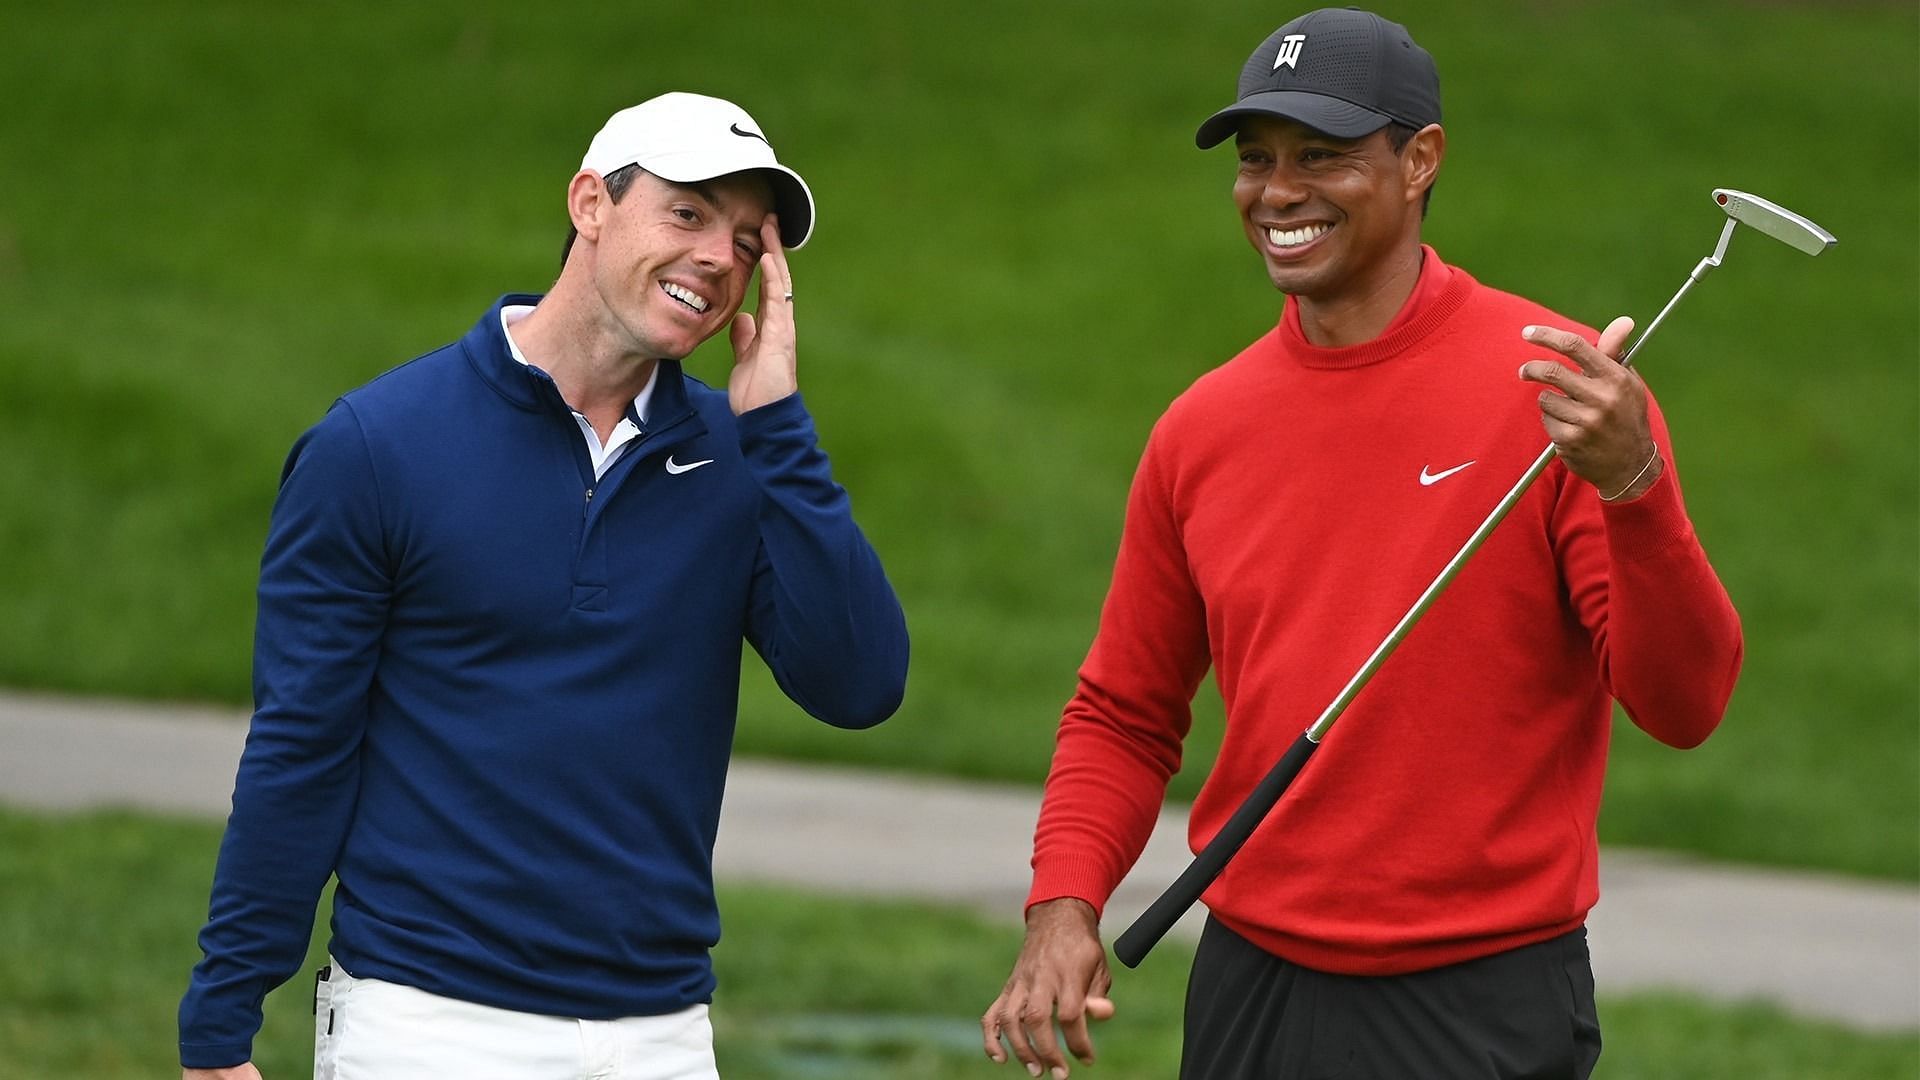 TGL is backed by the golf giants Woods and Mcllroy (Image via Getty)